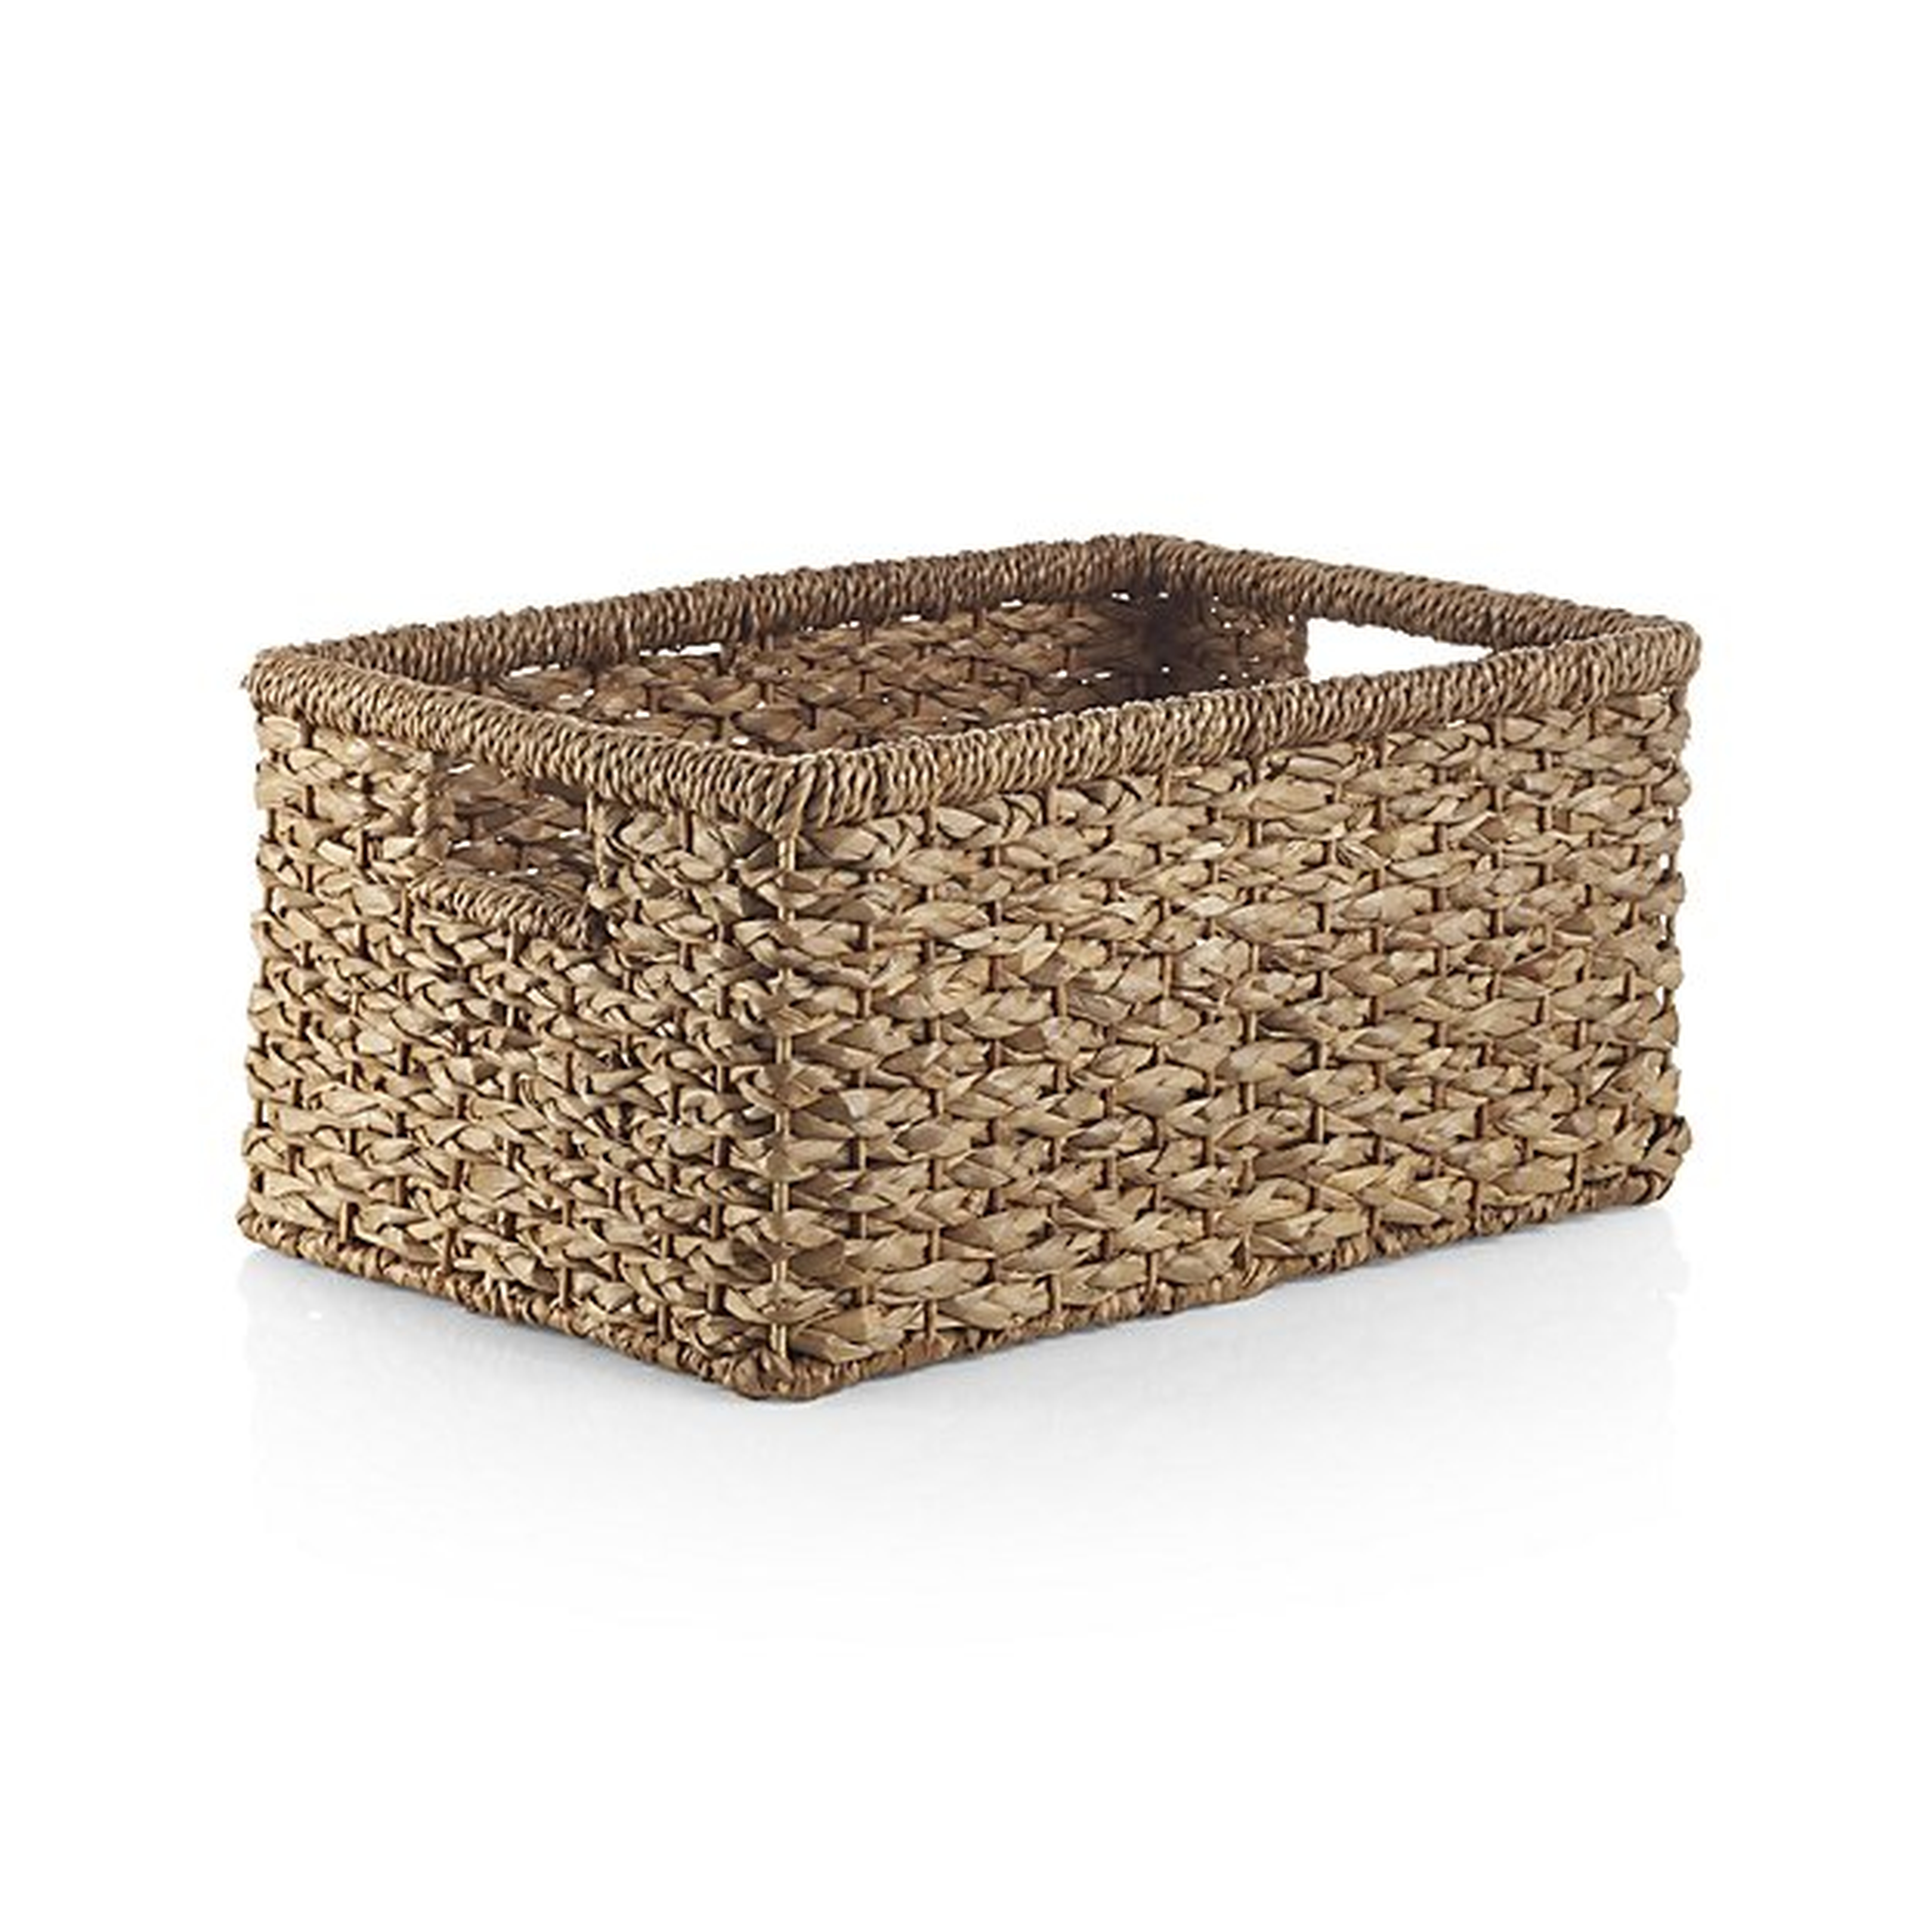 Kelby Medium Tote - Crate and Barrel